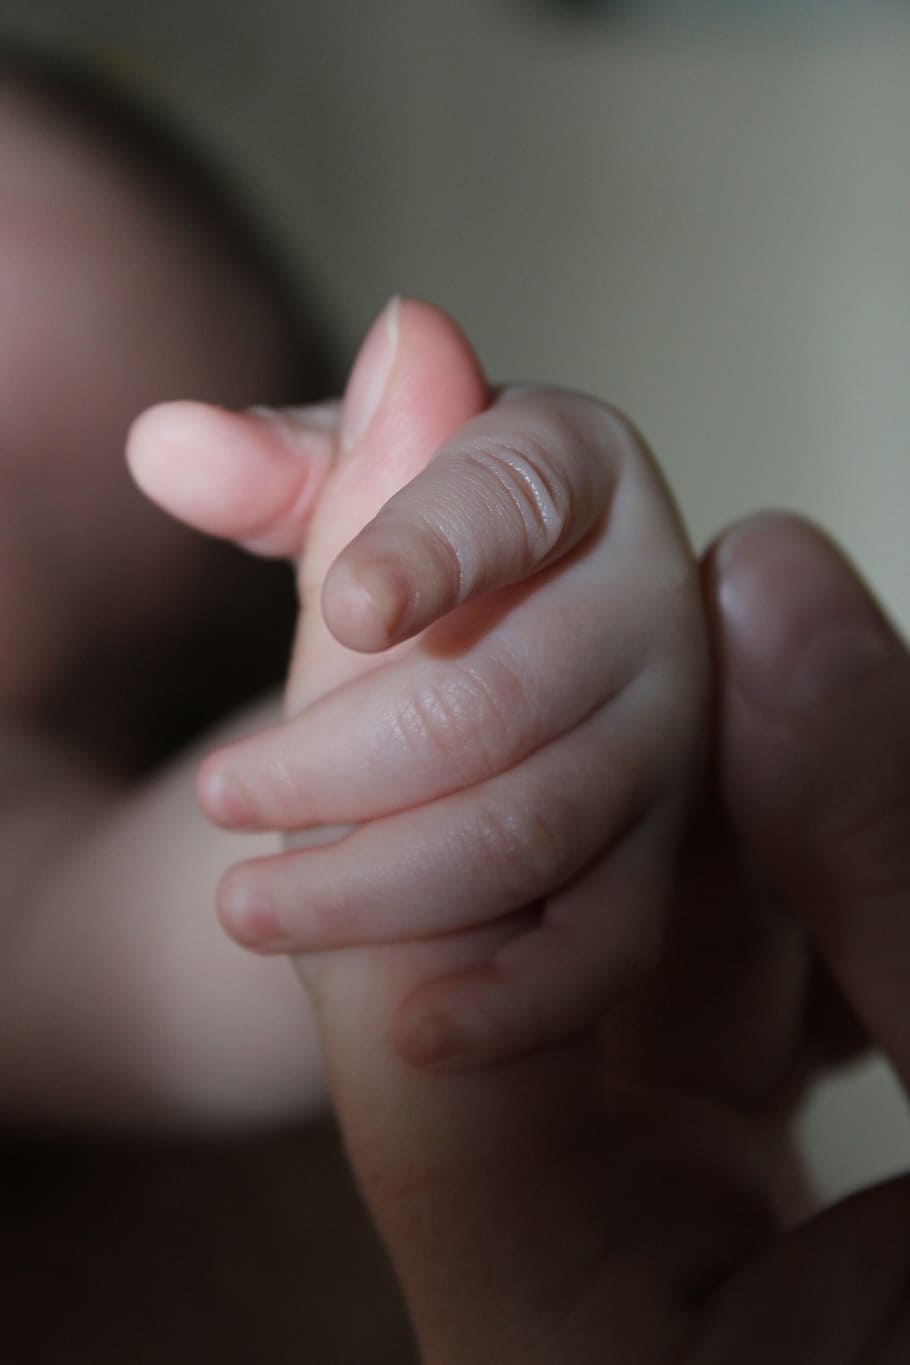 baby, holding, person, hand, newborn, child, kid, mother, family, parent